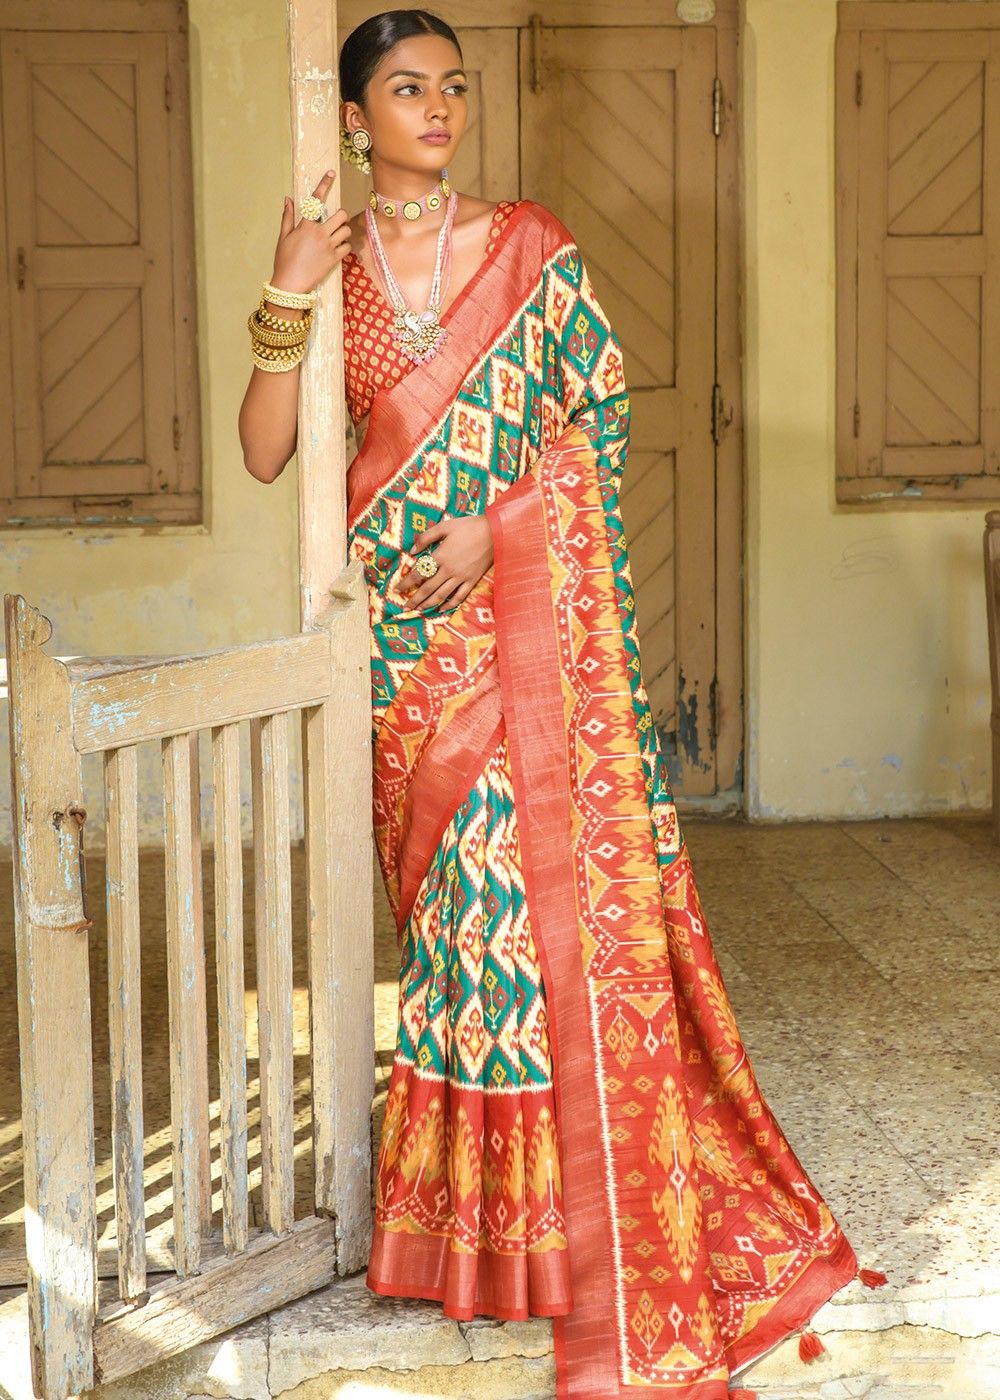 Multicolour - Women Floral Sarees Online at Soch - Multicolour Tussar Saree  With Floral Printed Designs And Zari Woven Floral Pallu